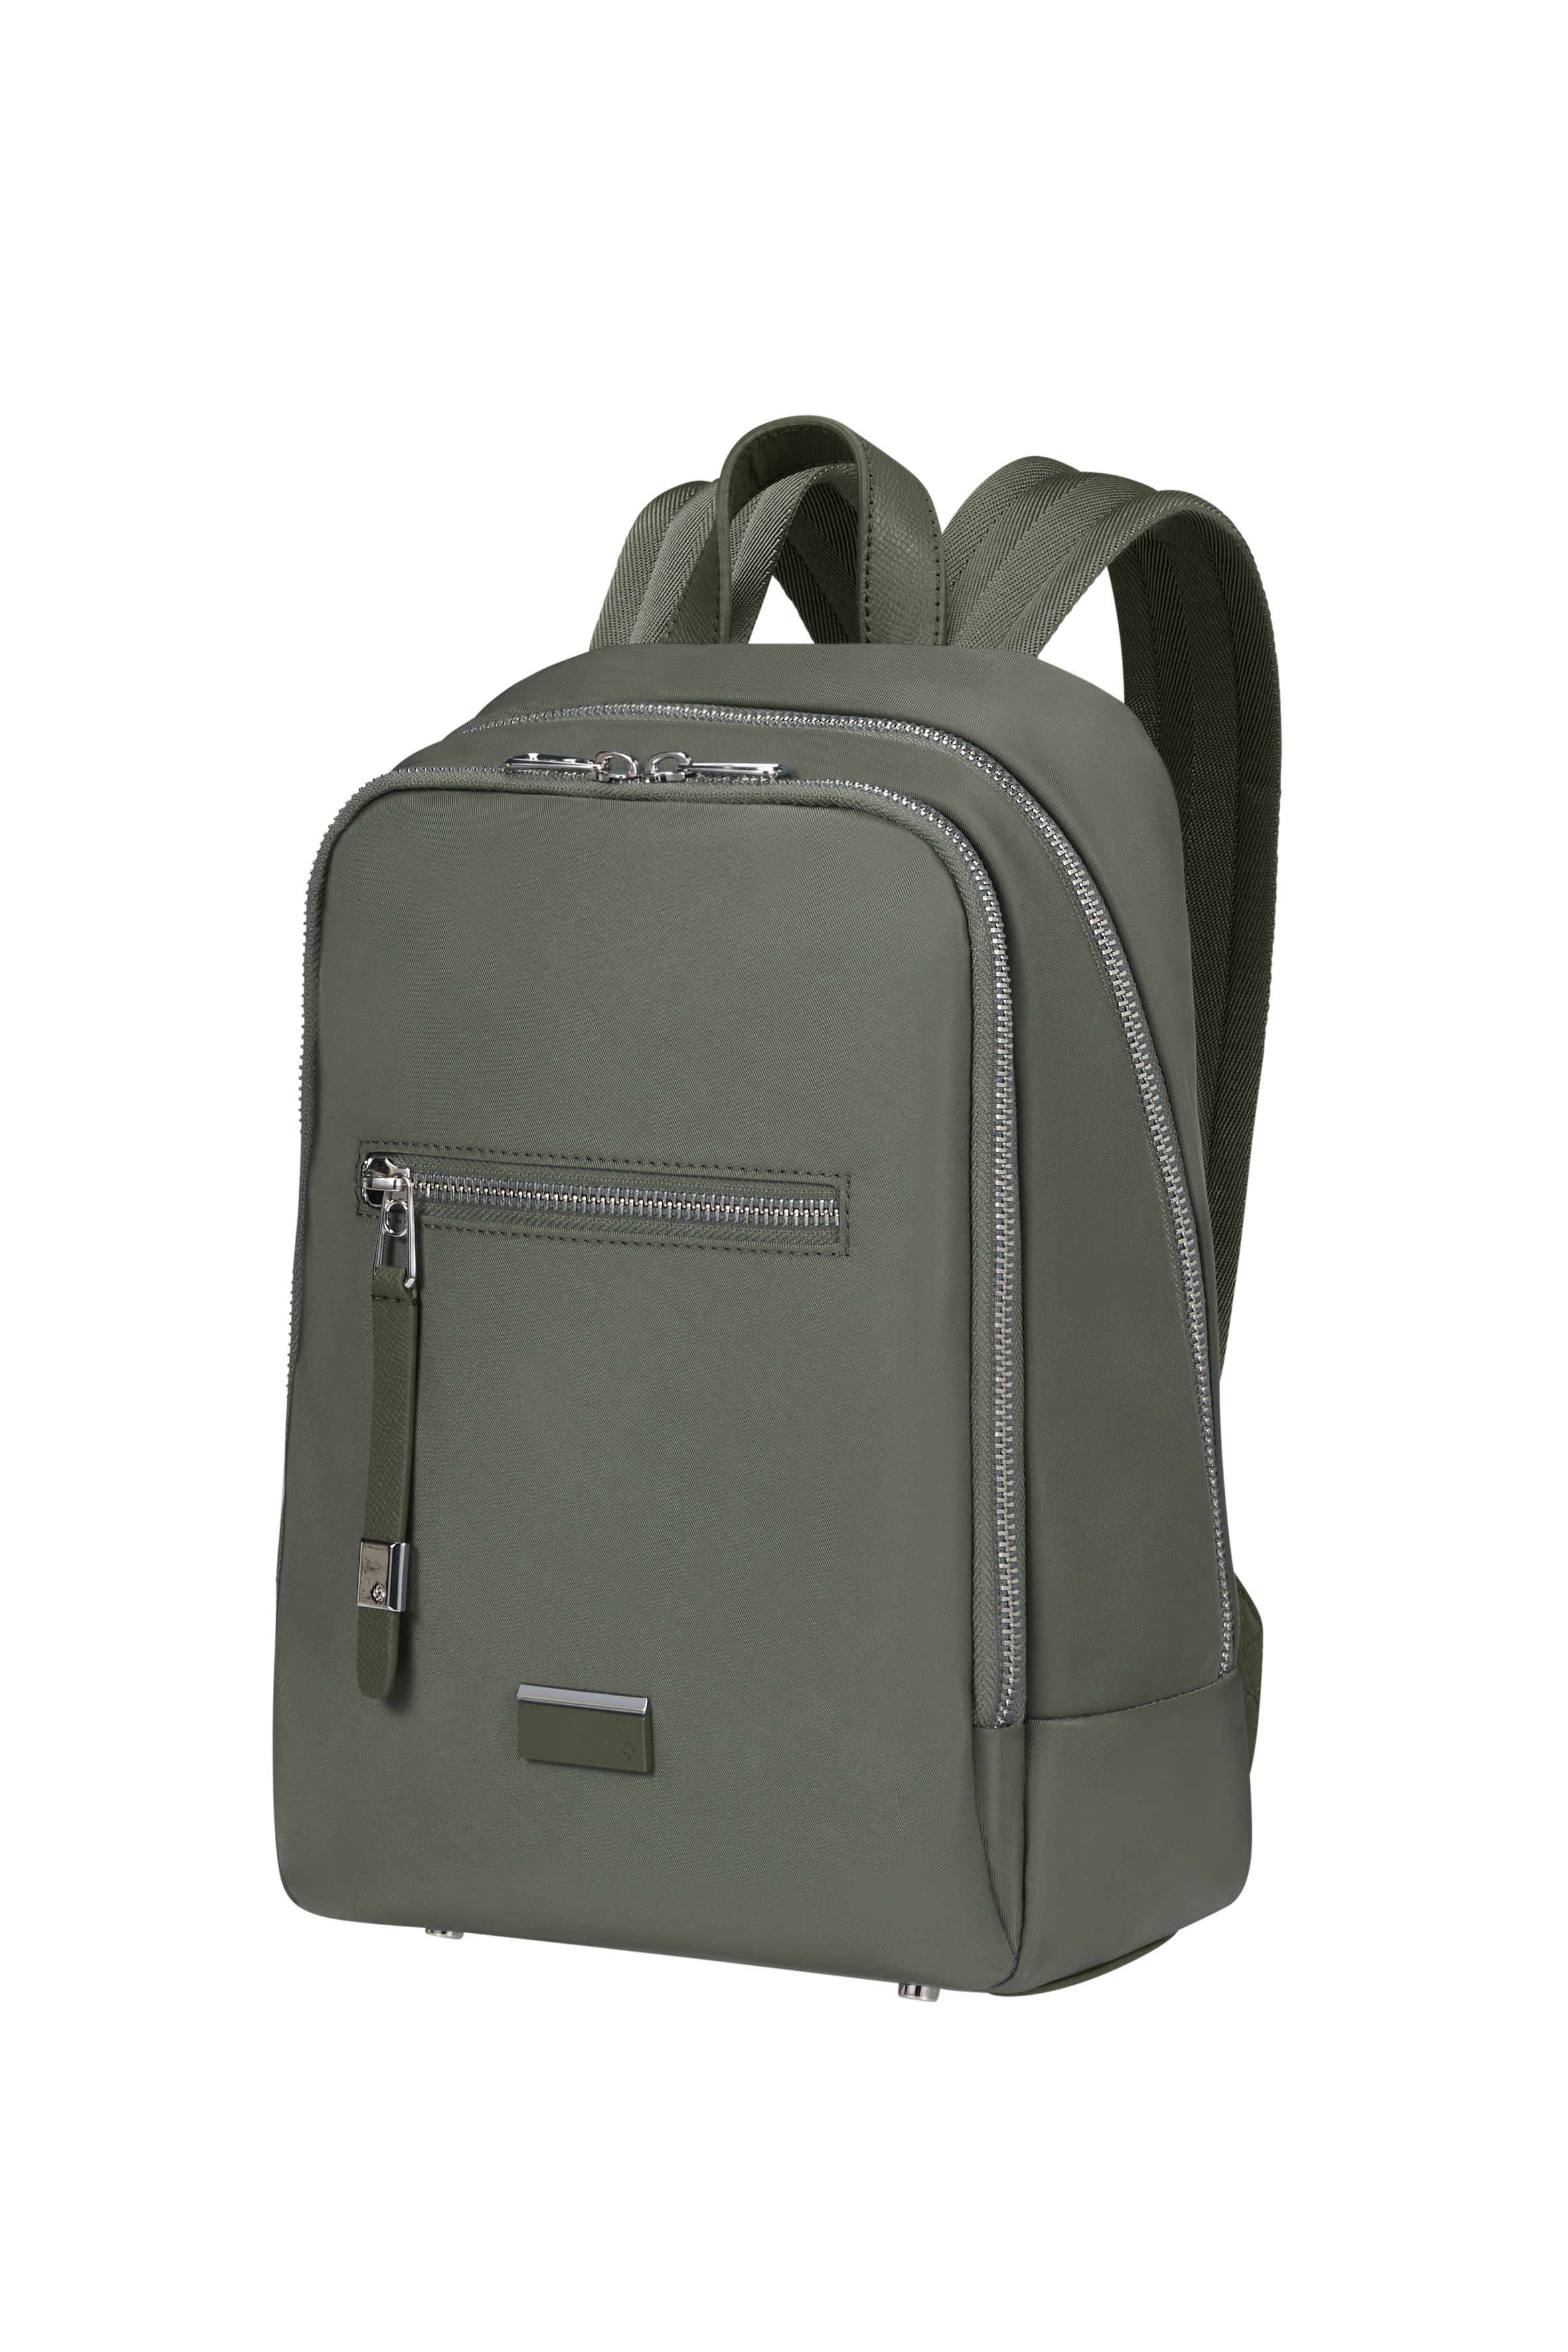 BE-HER BE HER RUCSAC DAMA S VERDE OLIVE